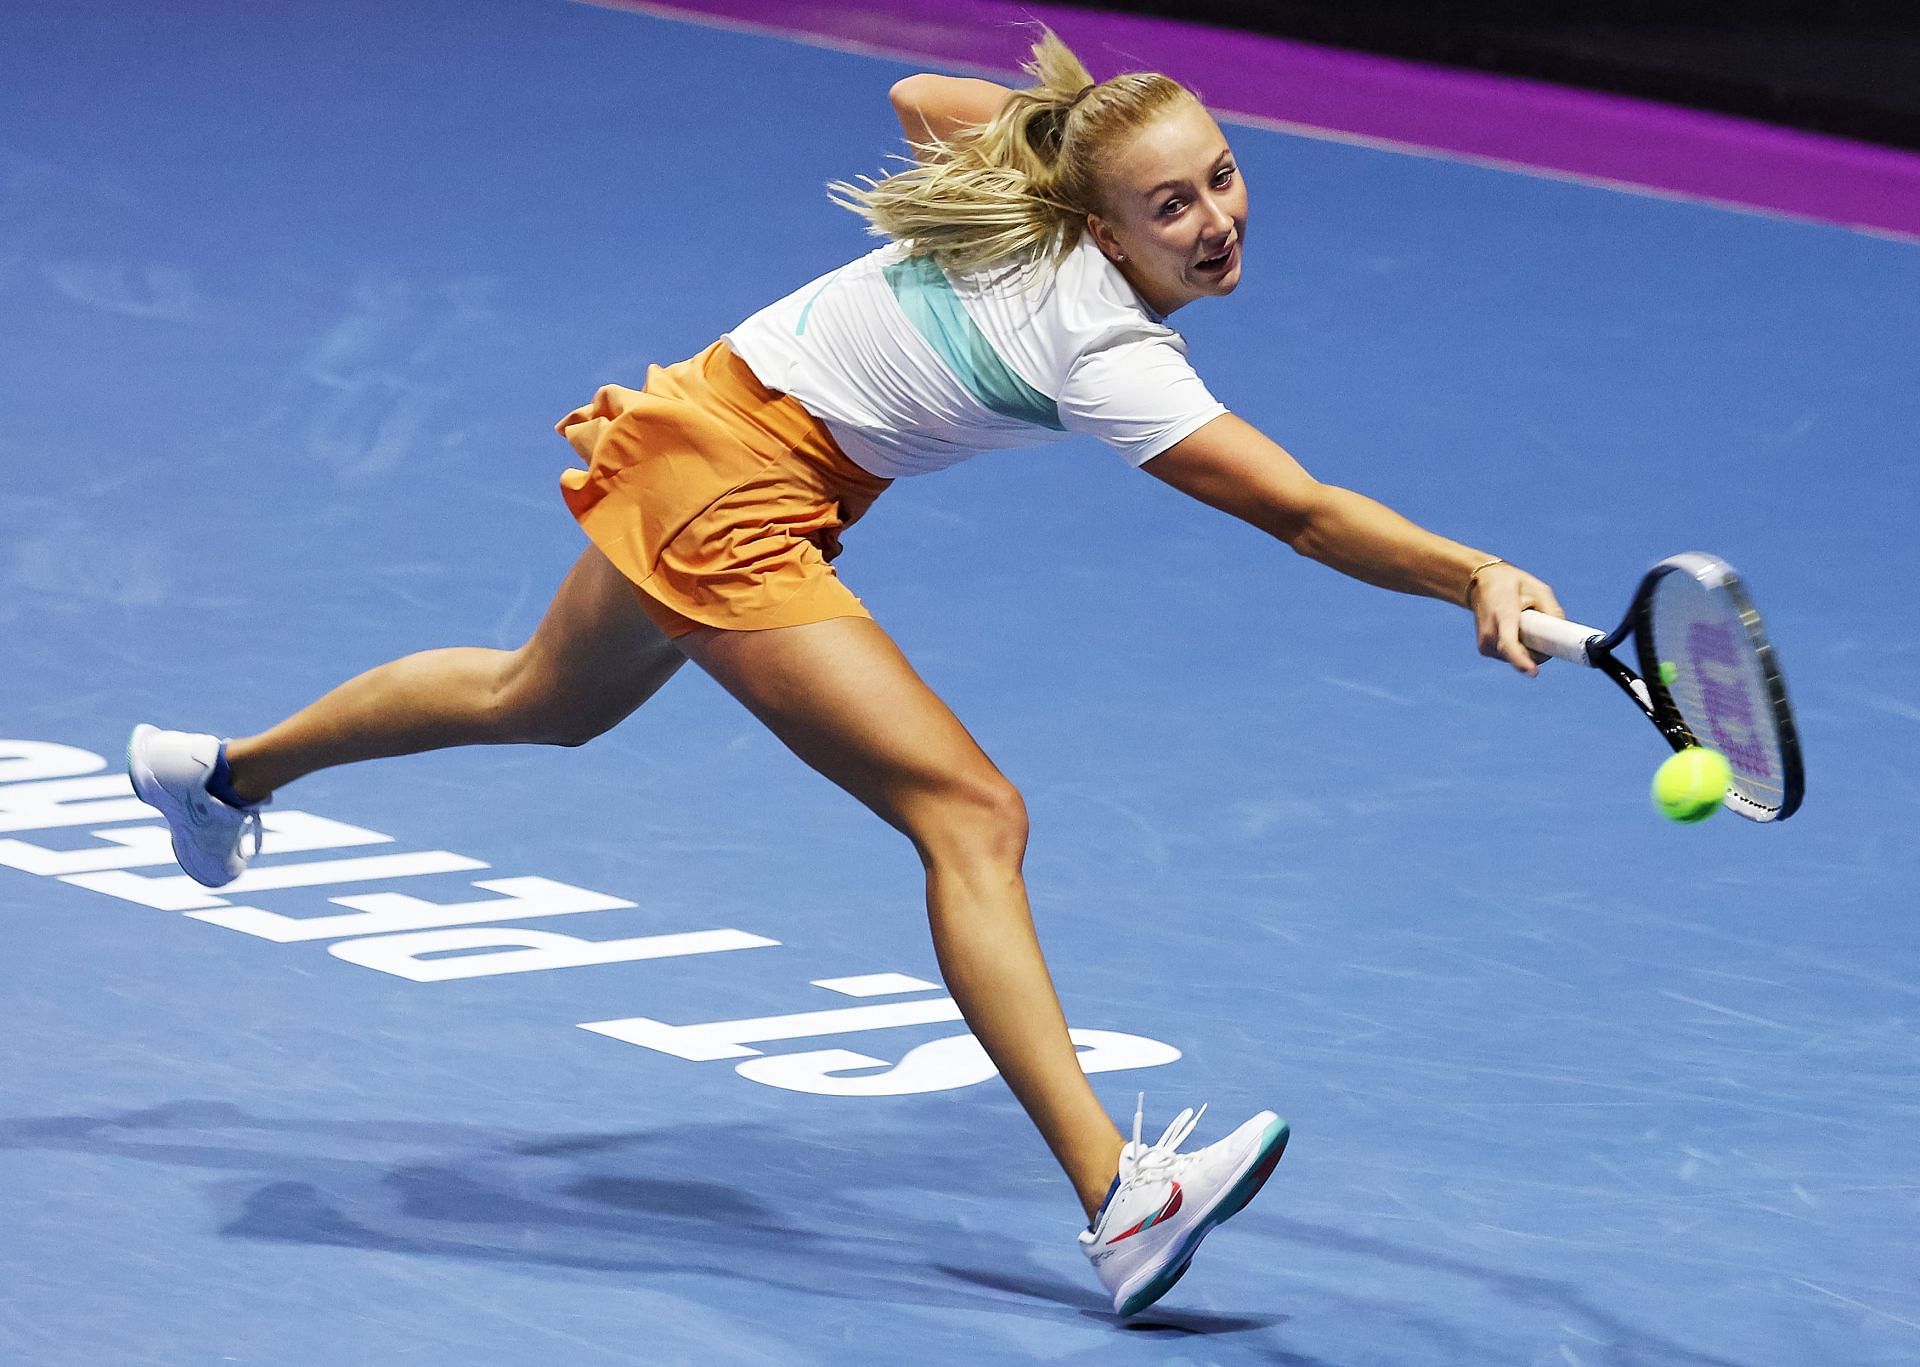 Potapova in action at the St. Petersburg Open